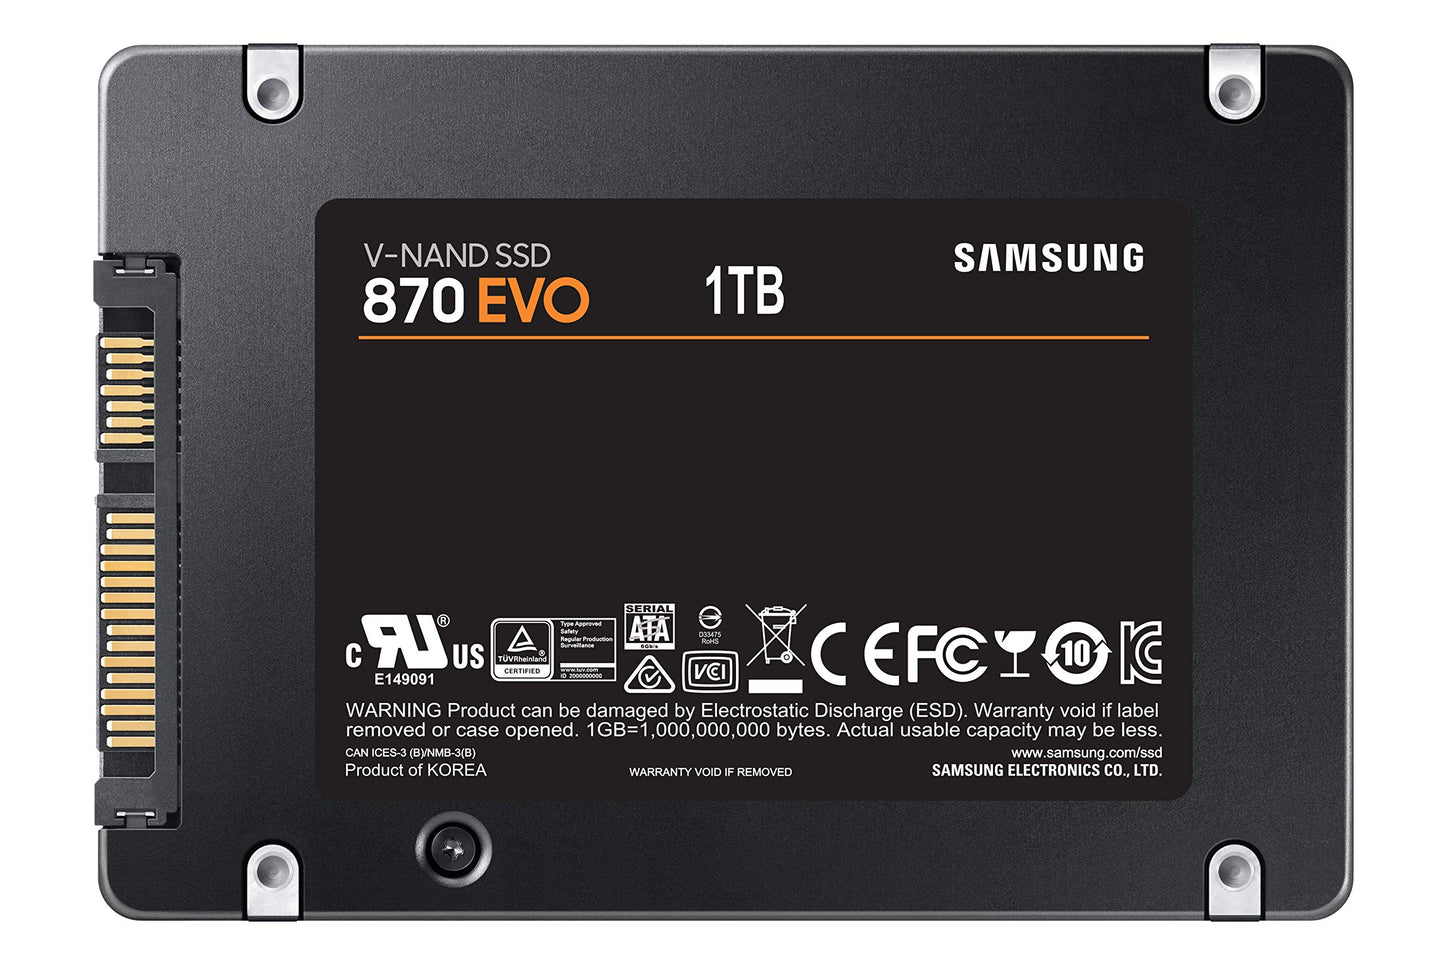 Samsung 870 EVO SATA III SSD 1TB 2.5” Internal Solid State Drive, Upgrade PC or Laptop Memory and Storage for IT Pros, Creators, Everyday Users, MZ-77E1T0B/AM